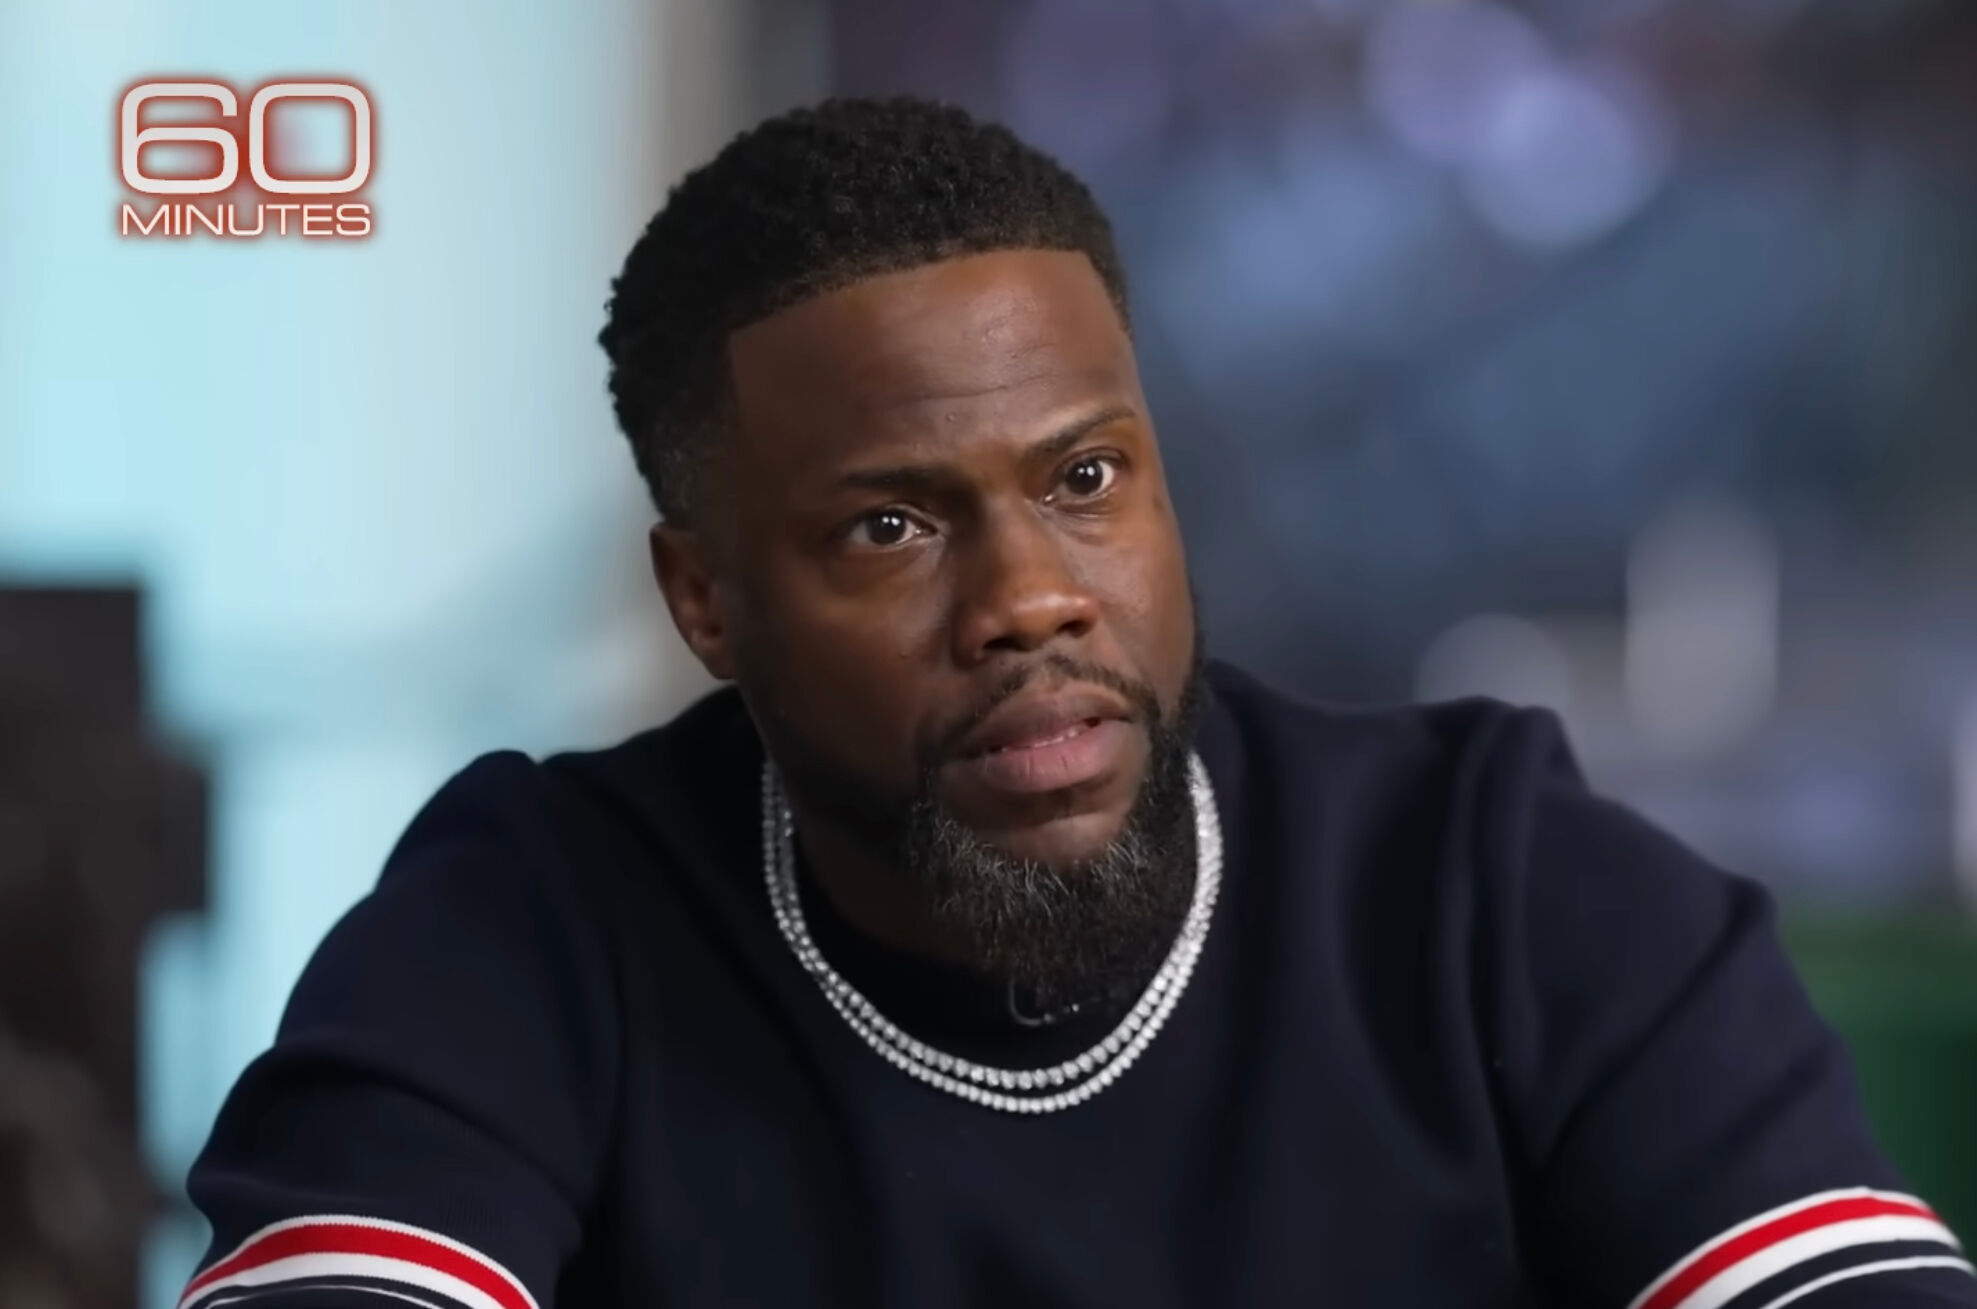 Kevin Hart on 60 Minutes